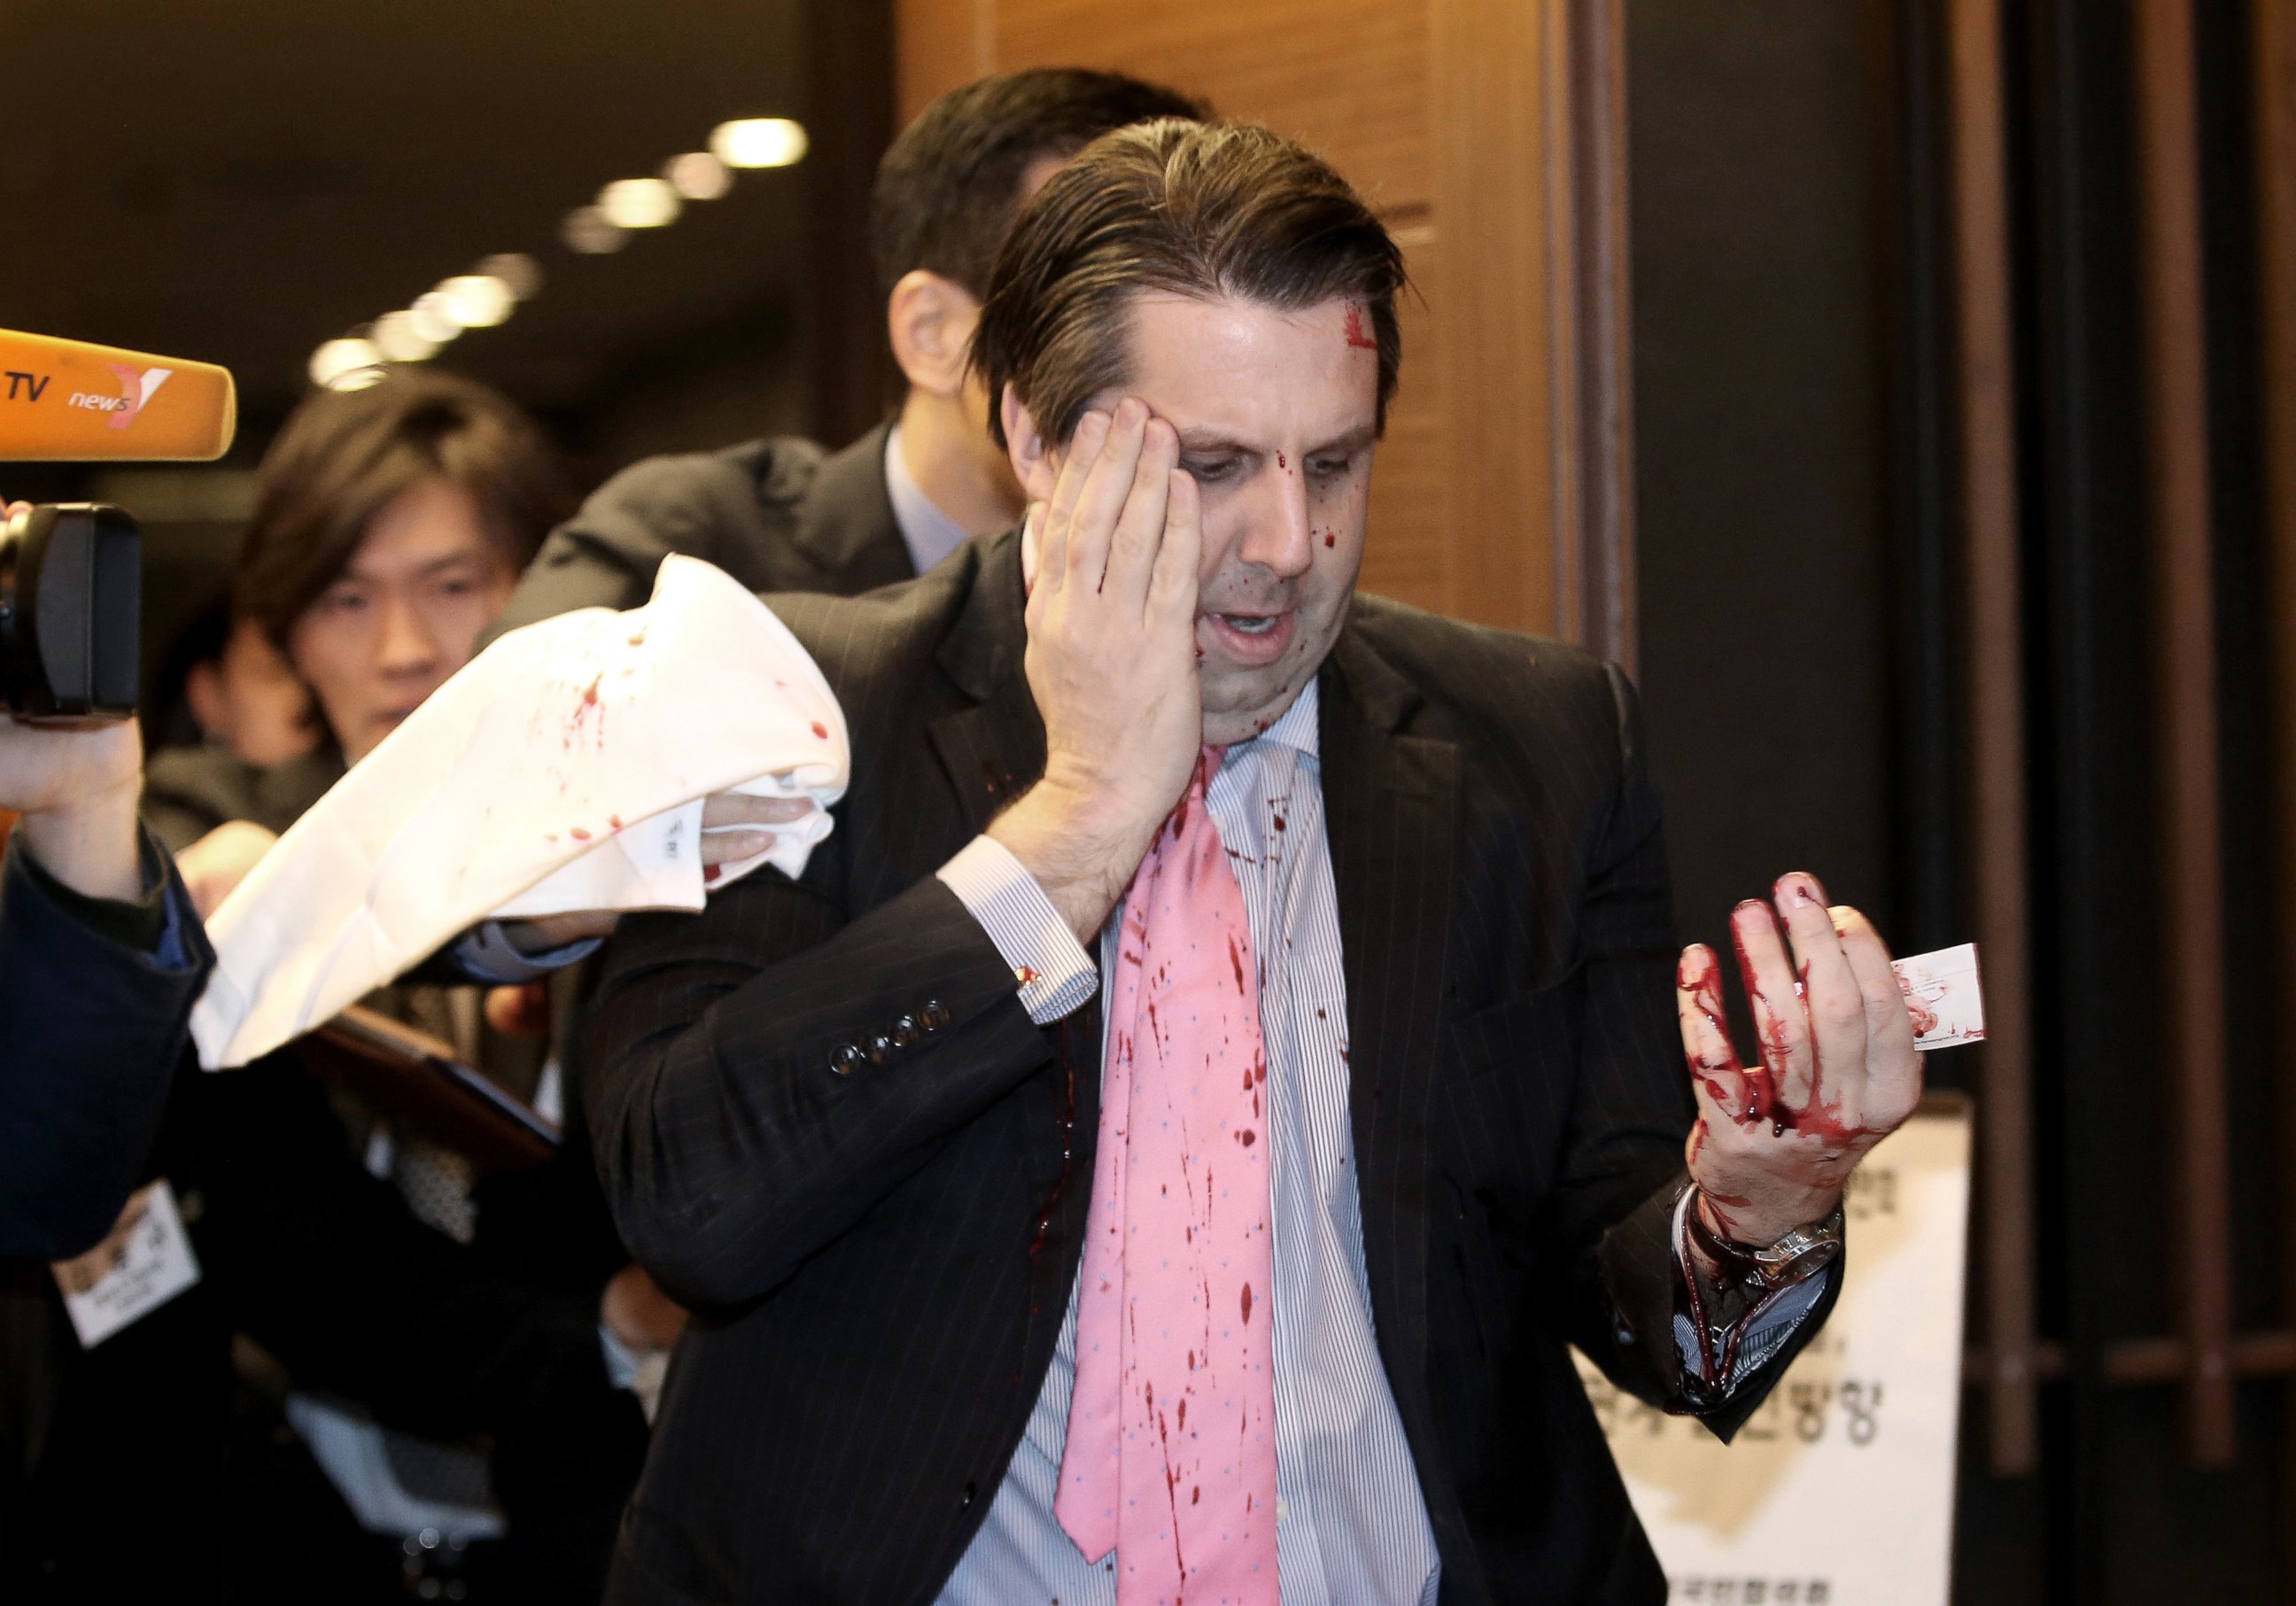 PHOTO: U.S. Ambassador to South Korea Mark Lippert leaves a lecture hall for a hospital in Seoul, South Korea, March 5, 2015, after being attacked by a man.